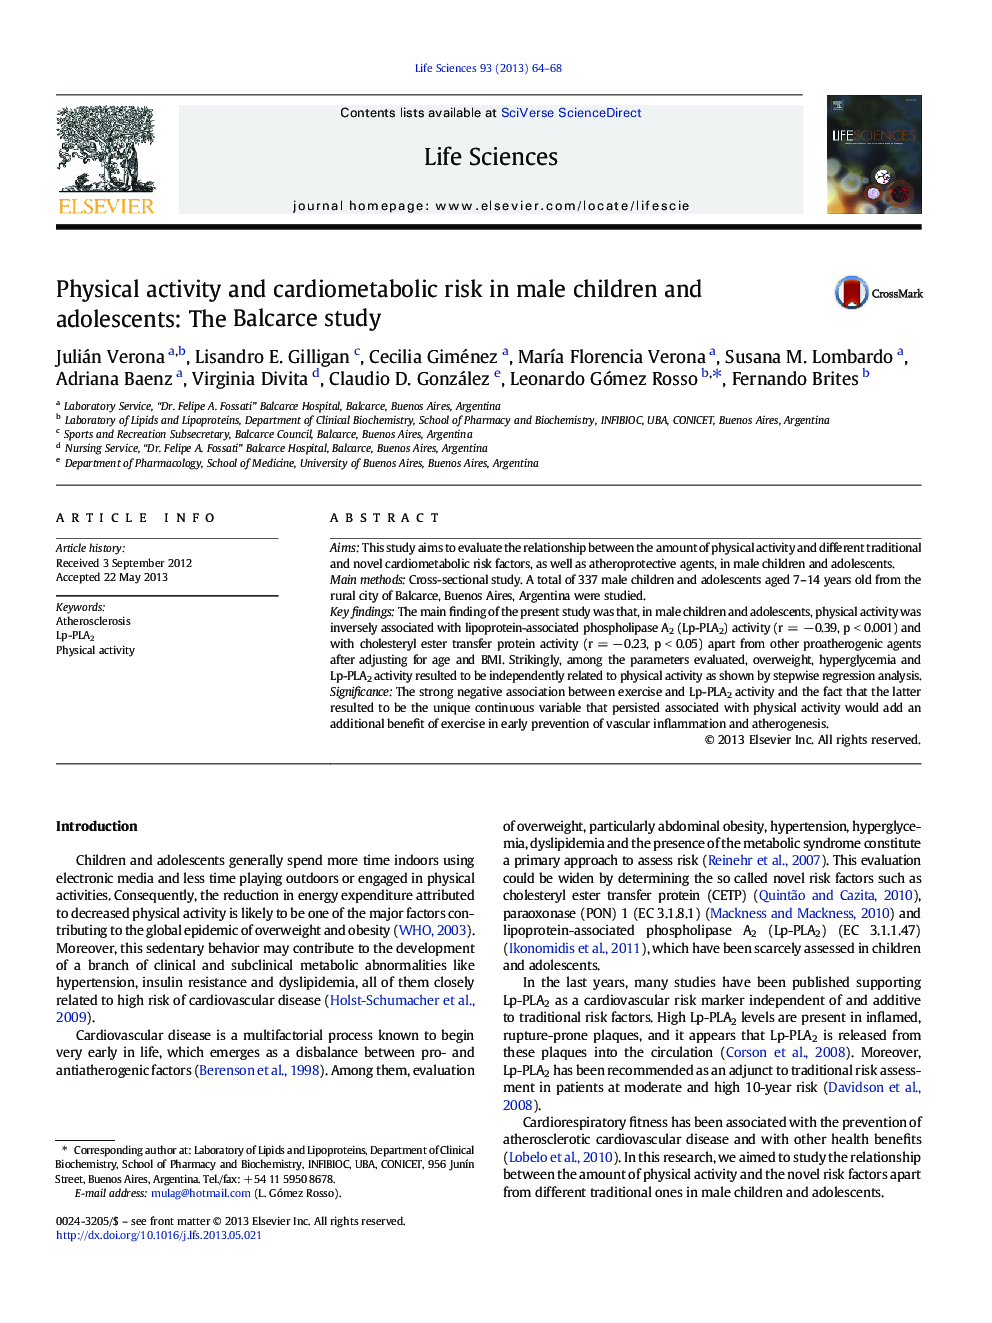 Physical activity and cardiometabolic risk in male children and adolescents: The Balcarce study